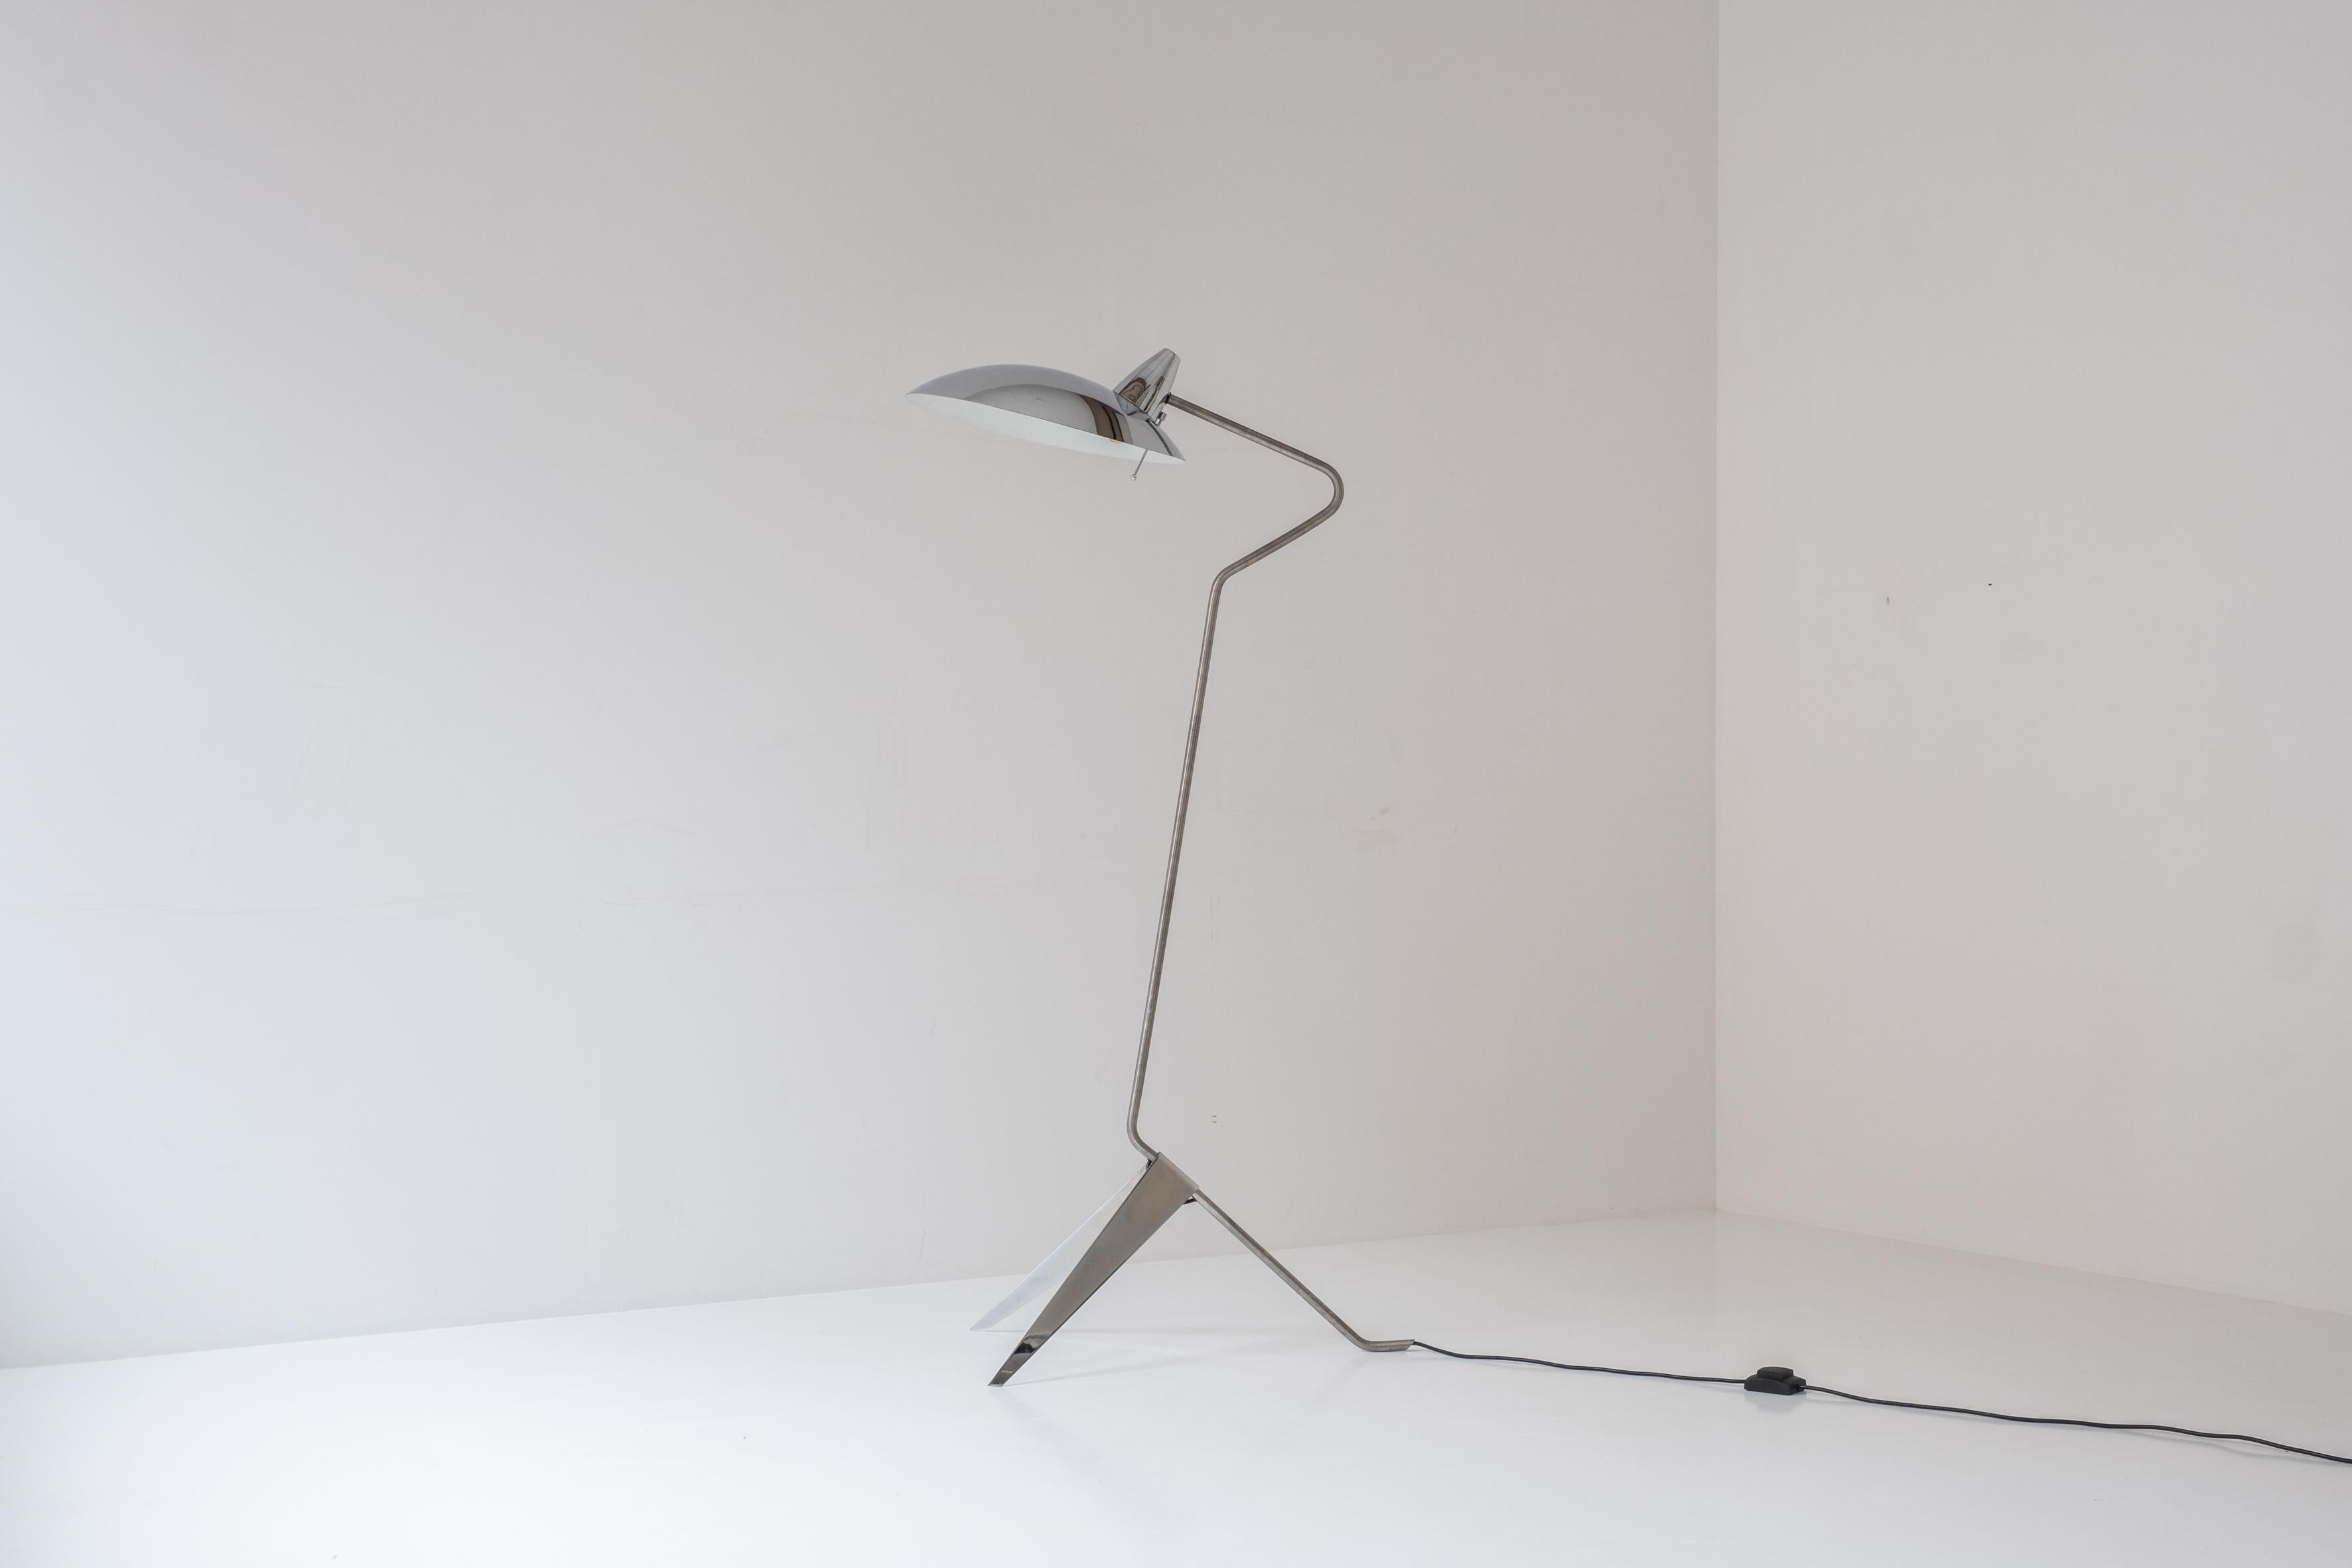 Lovely floor lamp from the 1970s. This floor lamp features a combination of nickel plated metal and a base and shade made out of chrome. Very elegant floor lamp in a marvelous condition.